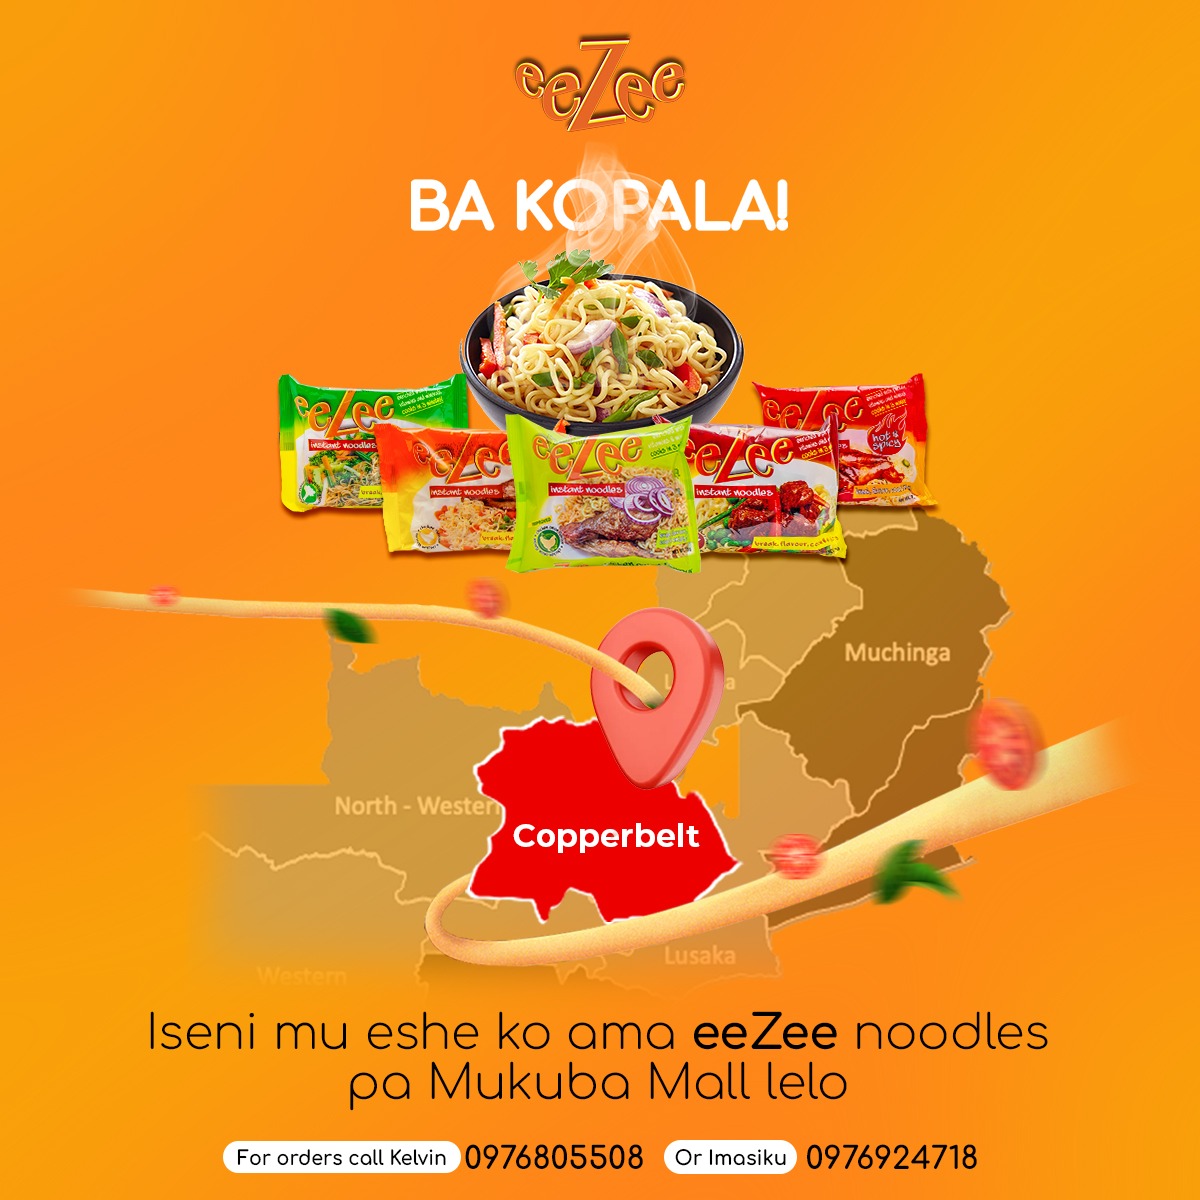 Ba Kopala!!! Kwata consistance maybe 4/5 eeZee flavours maybe for assitance itako Felistus! 💃😂. Join us today at Mukuba mall from 9am for a free mouthwatering tasting of eeZee noodles. Don't miss out! #eeZeenoodles #MukubaMall #FreeeeZeeTasting